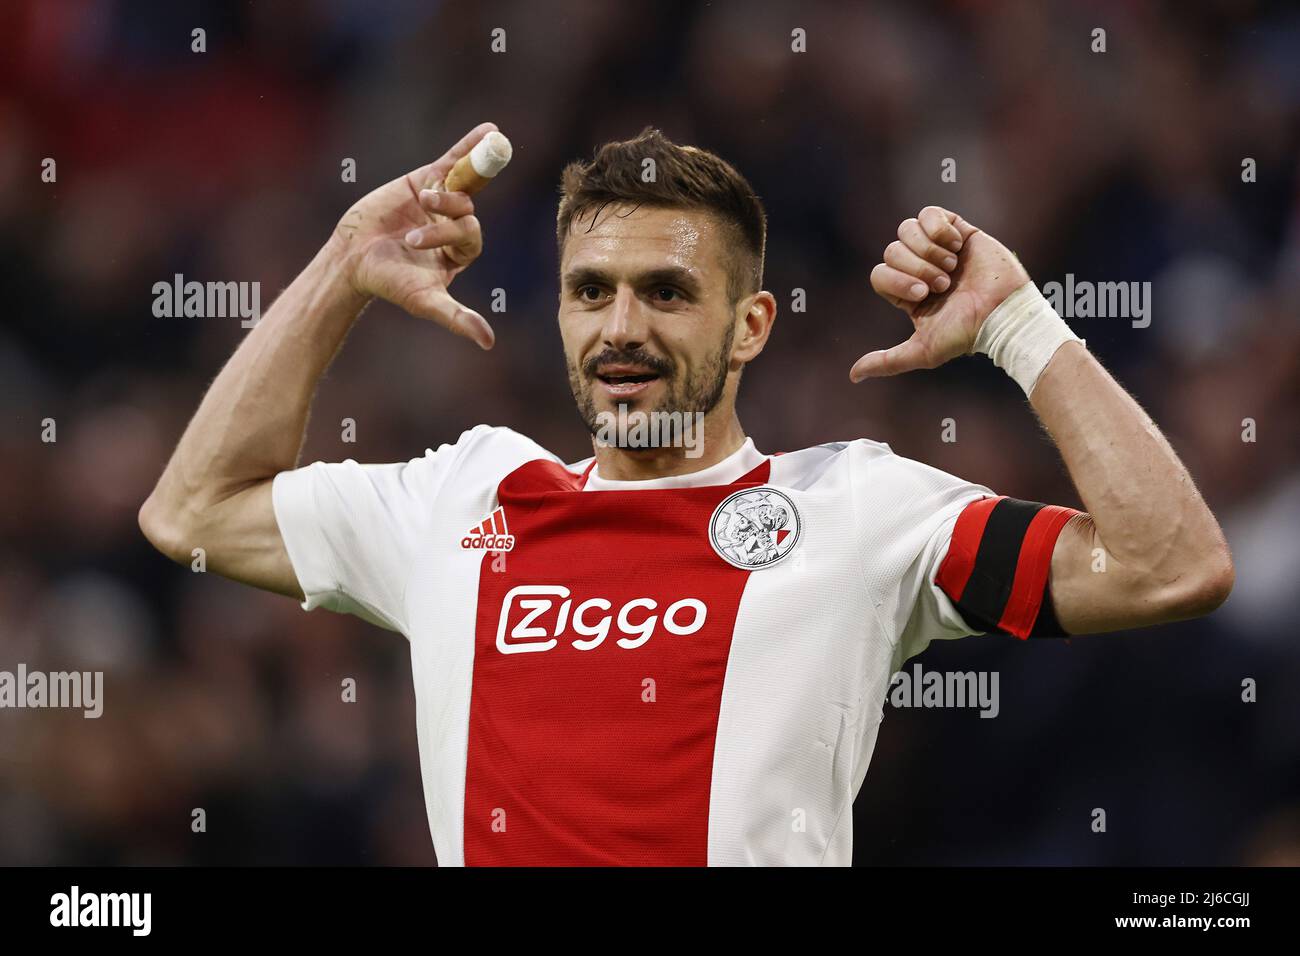 AMSTERDAM - Dusan Tadic of Ajax celebrates the 1-0 during the Dutch  Eredivisie match between Ajax Amsterdam and PEC Zwolle at the Johan Cruijff  ArenA on April 30, 2022 in Amsterdam, Netherlands.